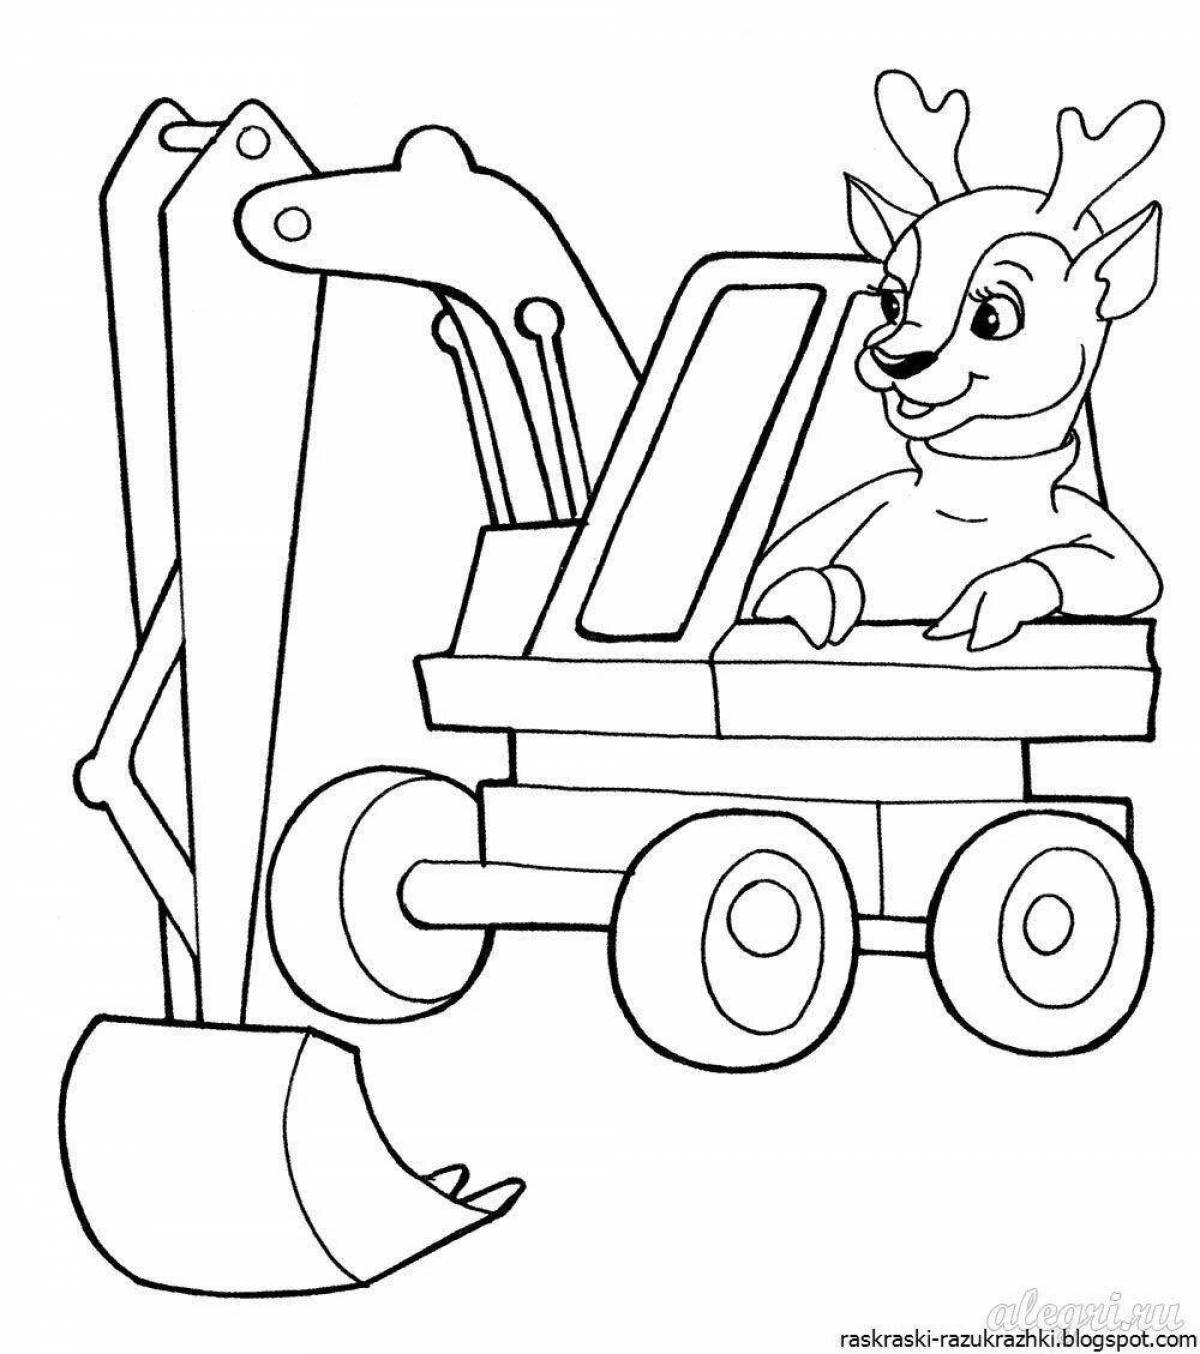 Attractive excavator coloring book for 5-6 year olds